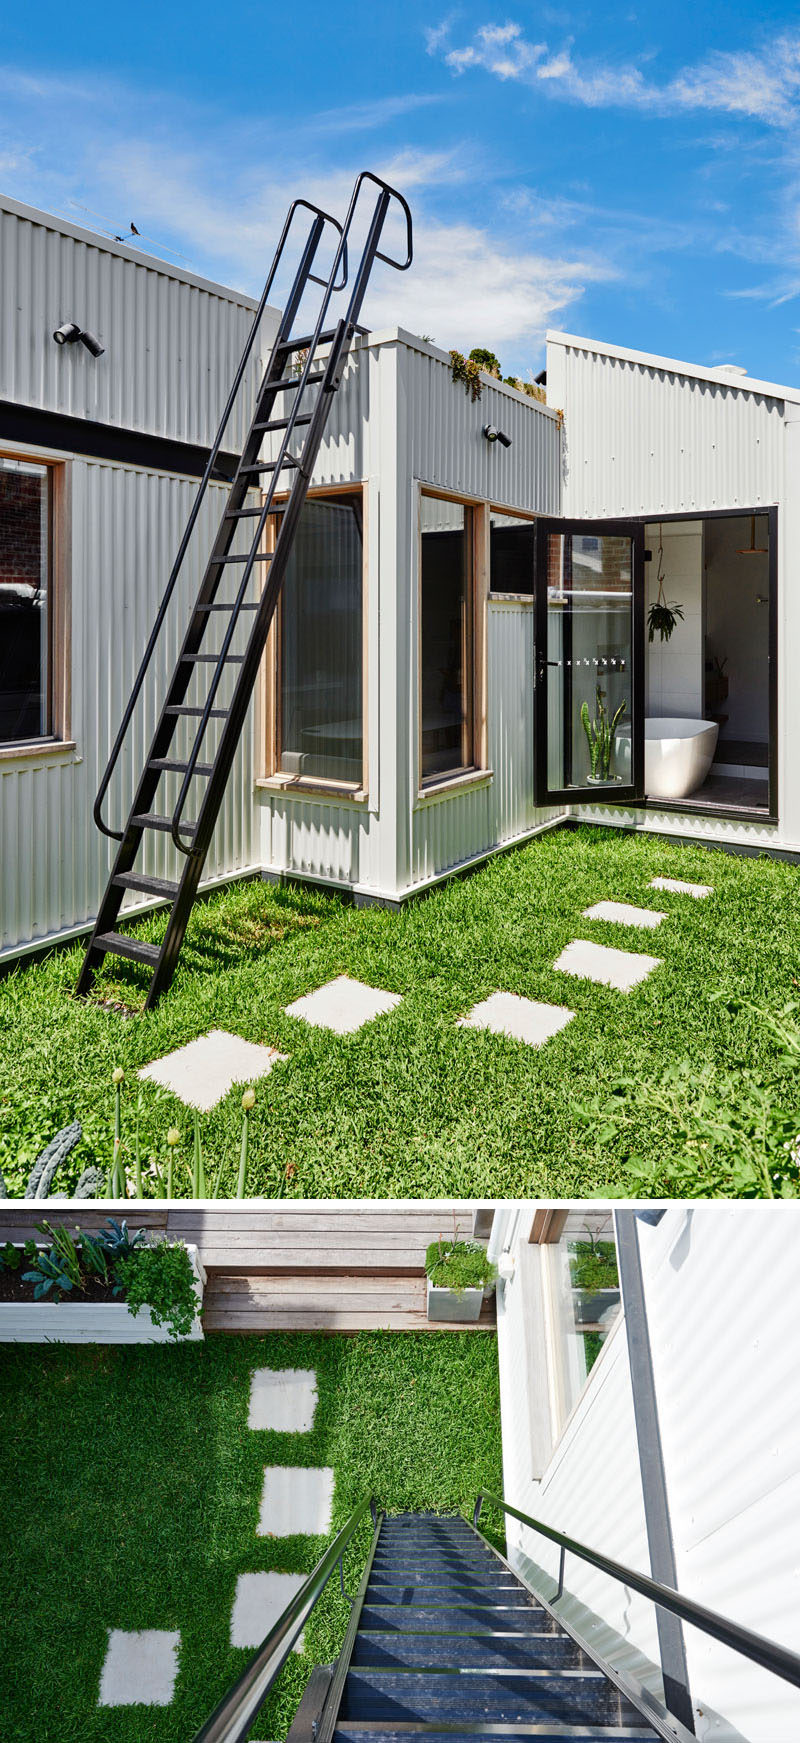 This renovated house has a small grassy area with stepping stones that lead to a steel ladder that goes up onto the roof. #Ladder #Landscaping